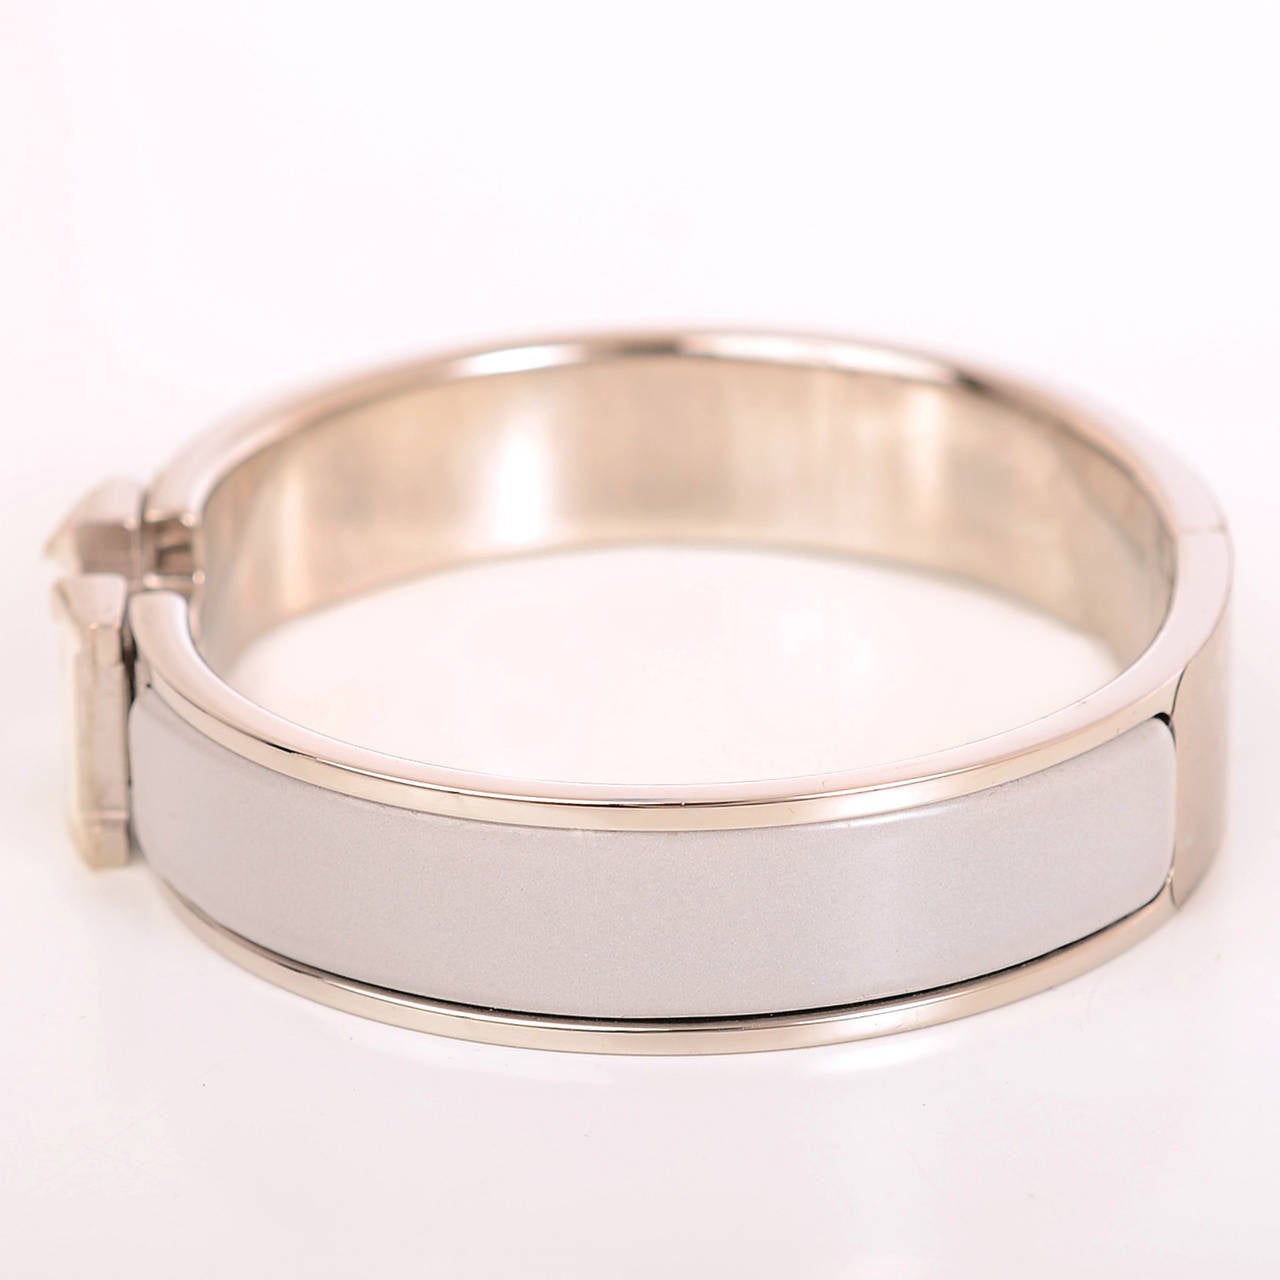 Hermes Clic Clac H bracelet in grey enamel with white enamel H closure with silver and palladium plated hardware in size PM.

Origin: France

Condition: Pristine, store fresh condition

Accompanied by: Hermes box, dust bag,